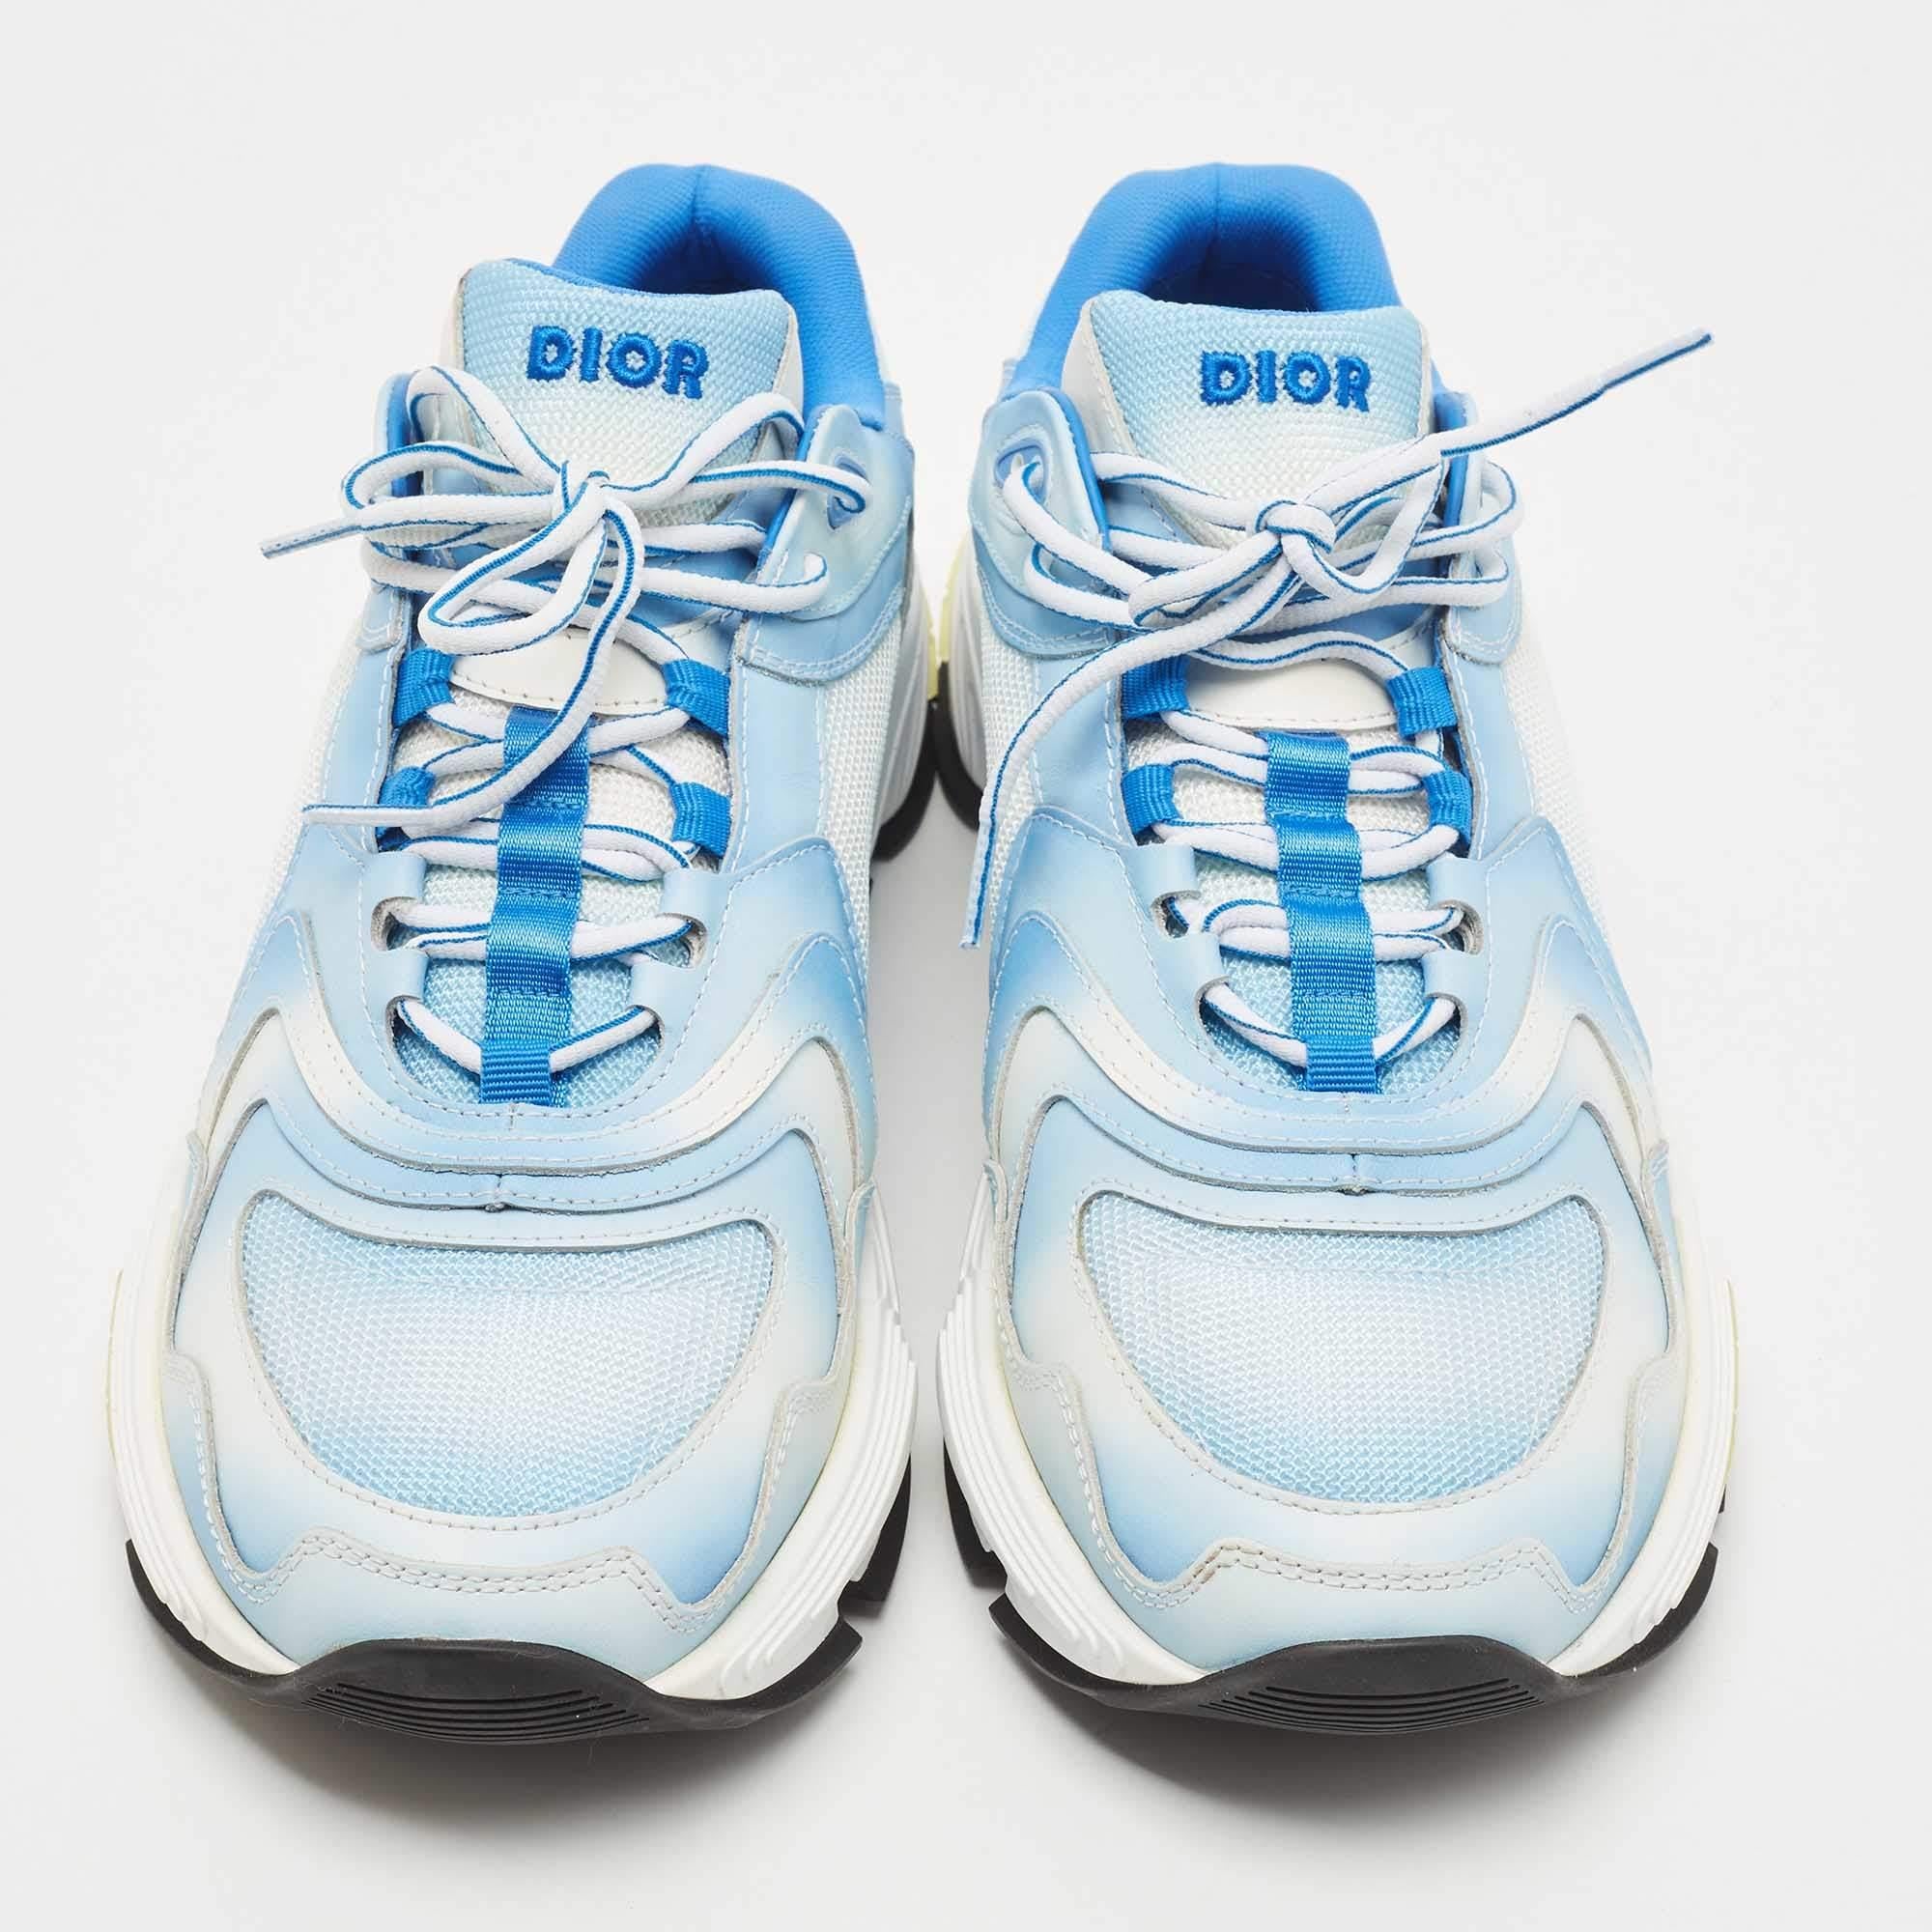 Designed into a chunky size, these Dior sneakers are not just stylish in appeal but also comfortable to wear. Crafted from quality materials, they are designed with signature elements. Finished off with laces on the vamps, these kicks still top any